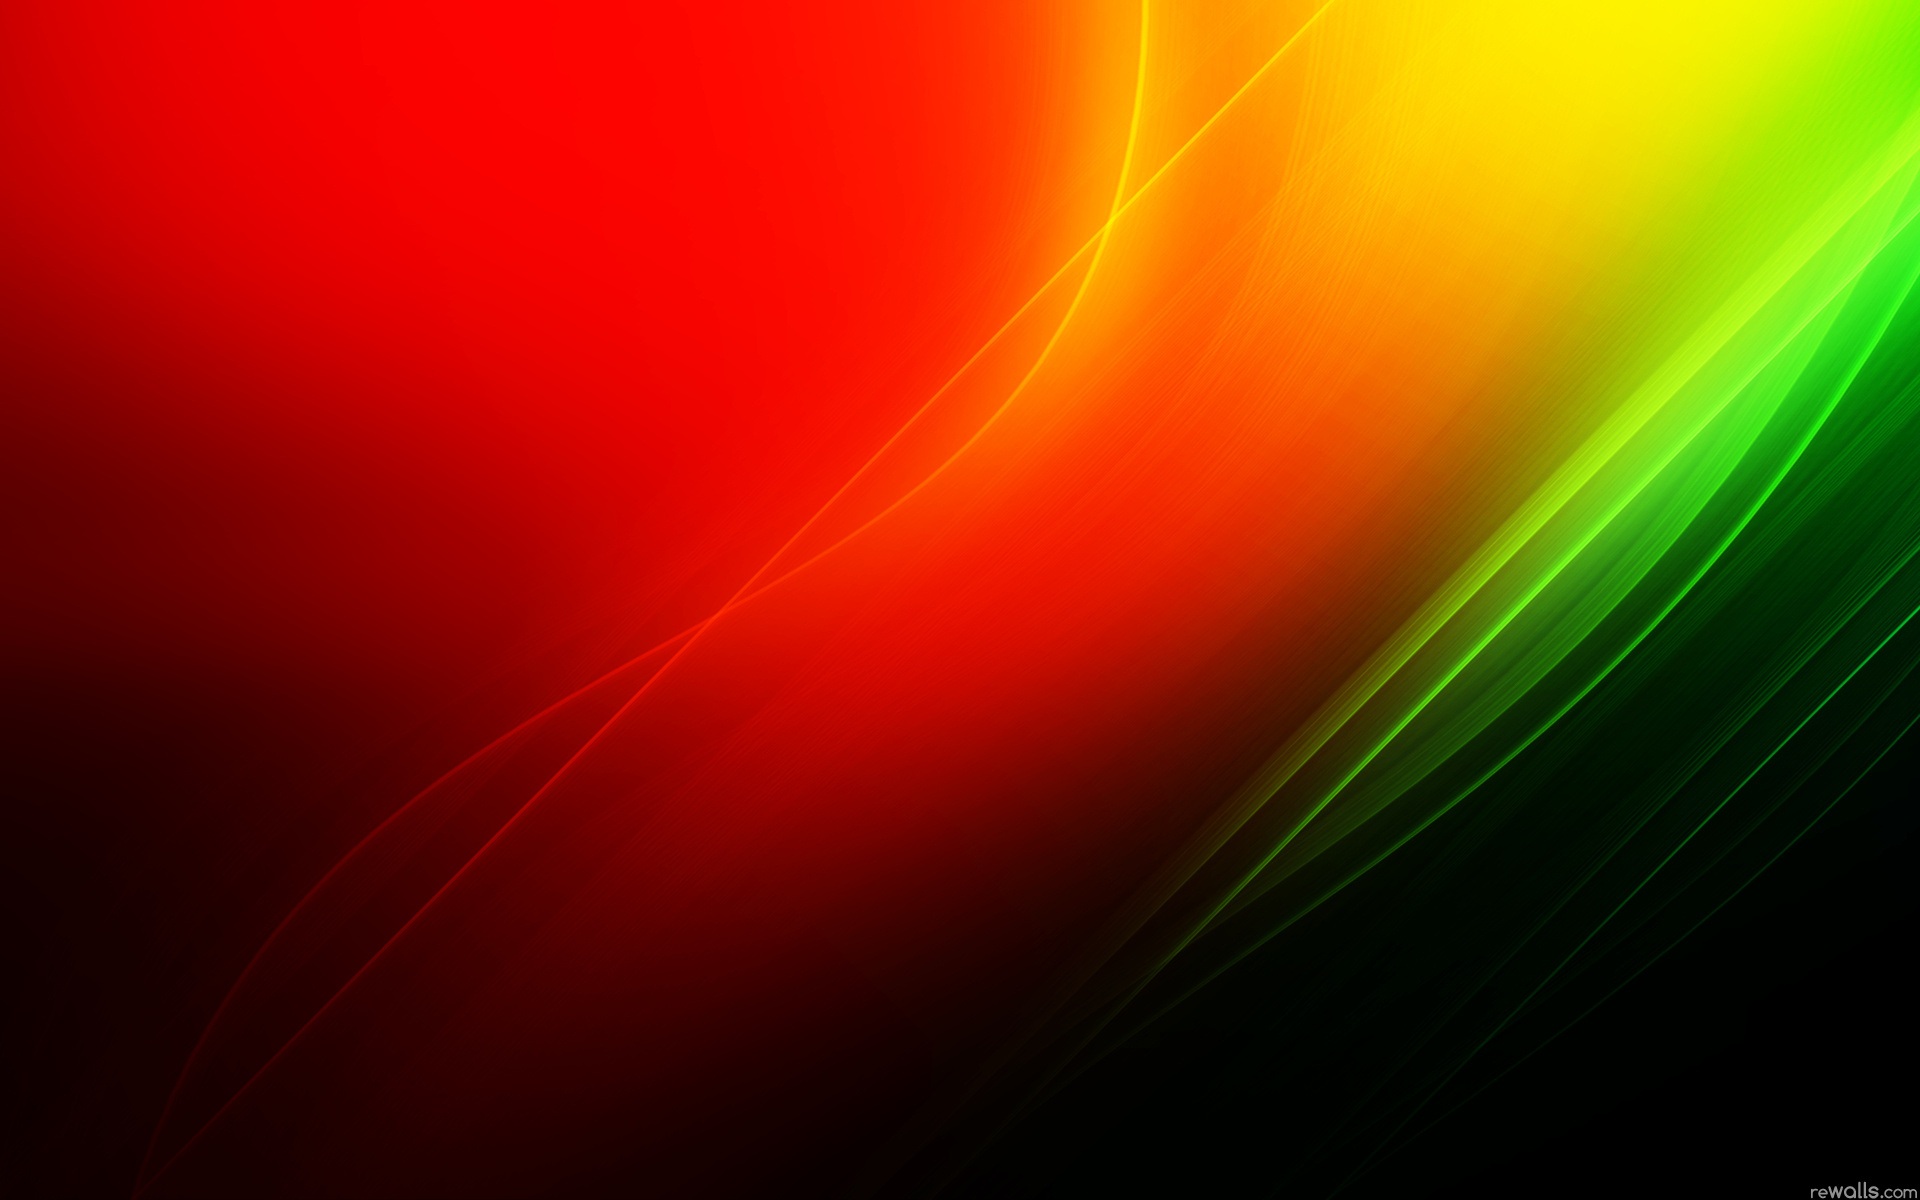 Wallpaper Red And Green Abstract Background - 4 Color Background Hd -  1920x1200 Wallpaper 